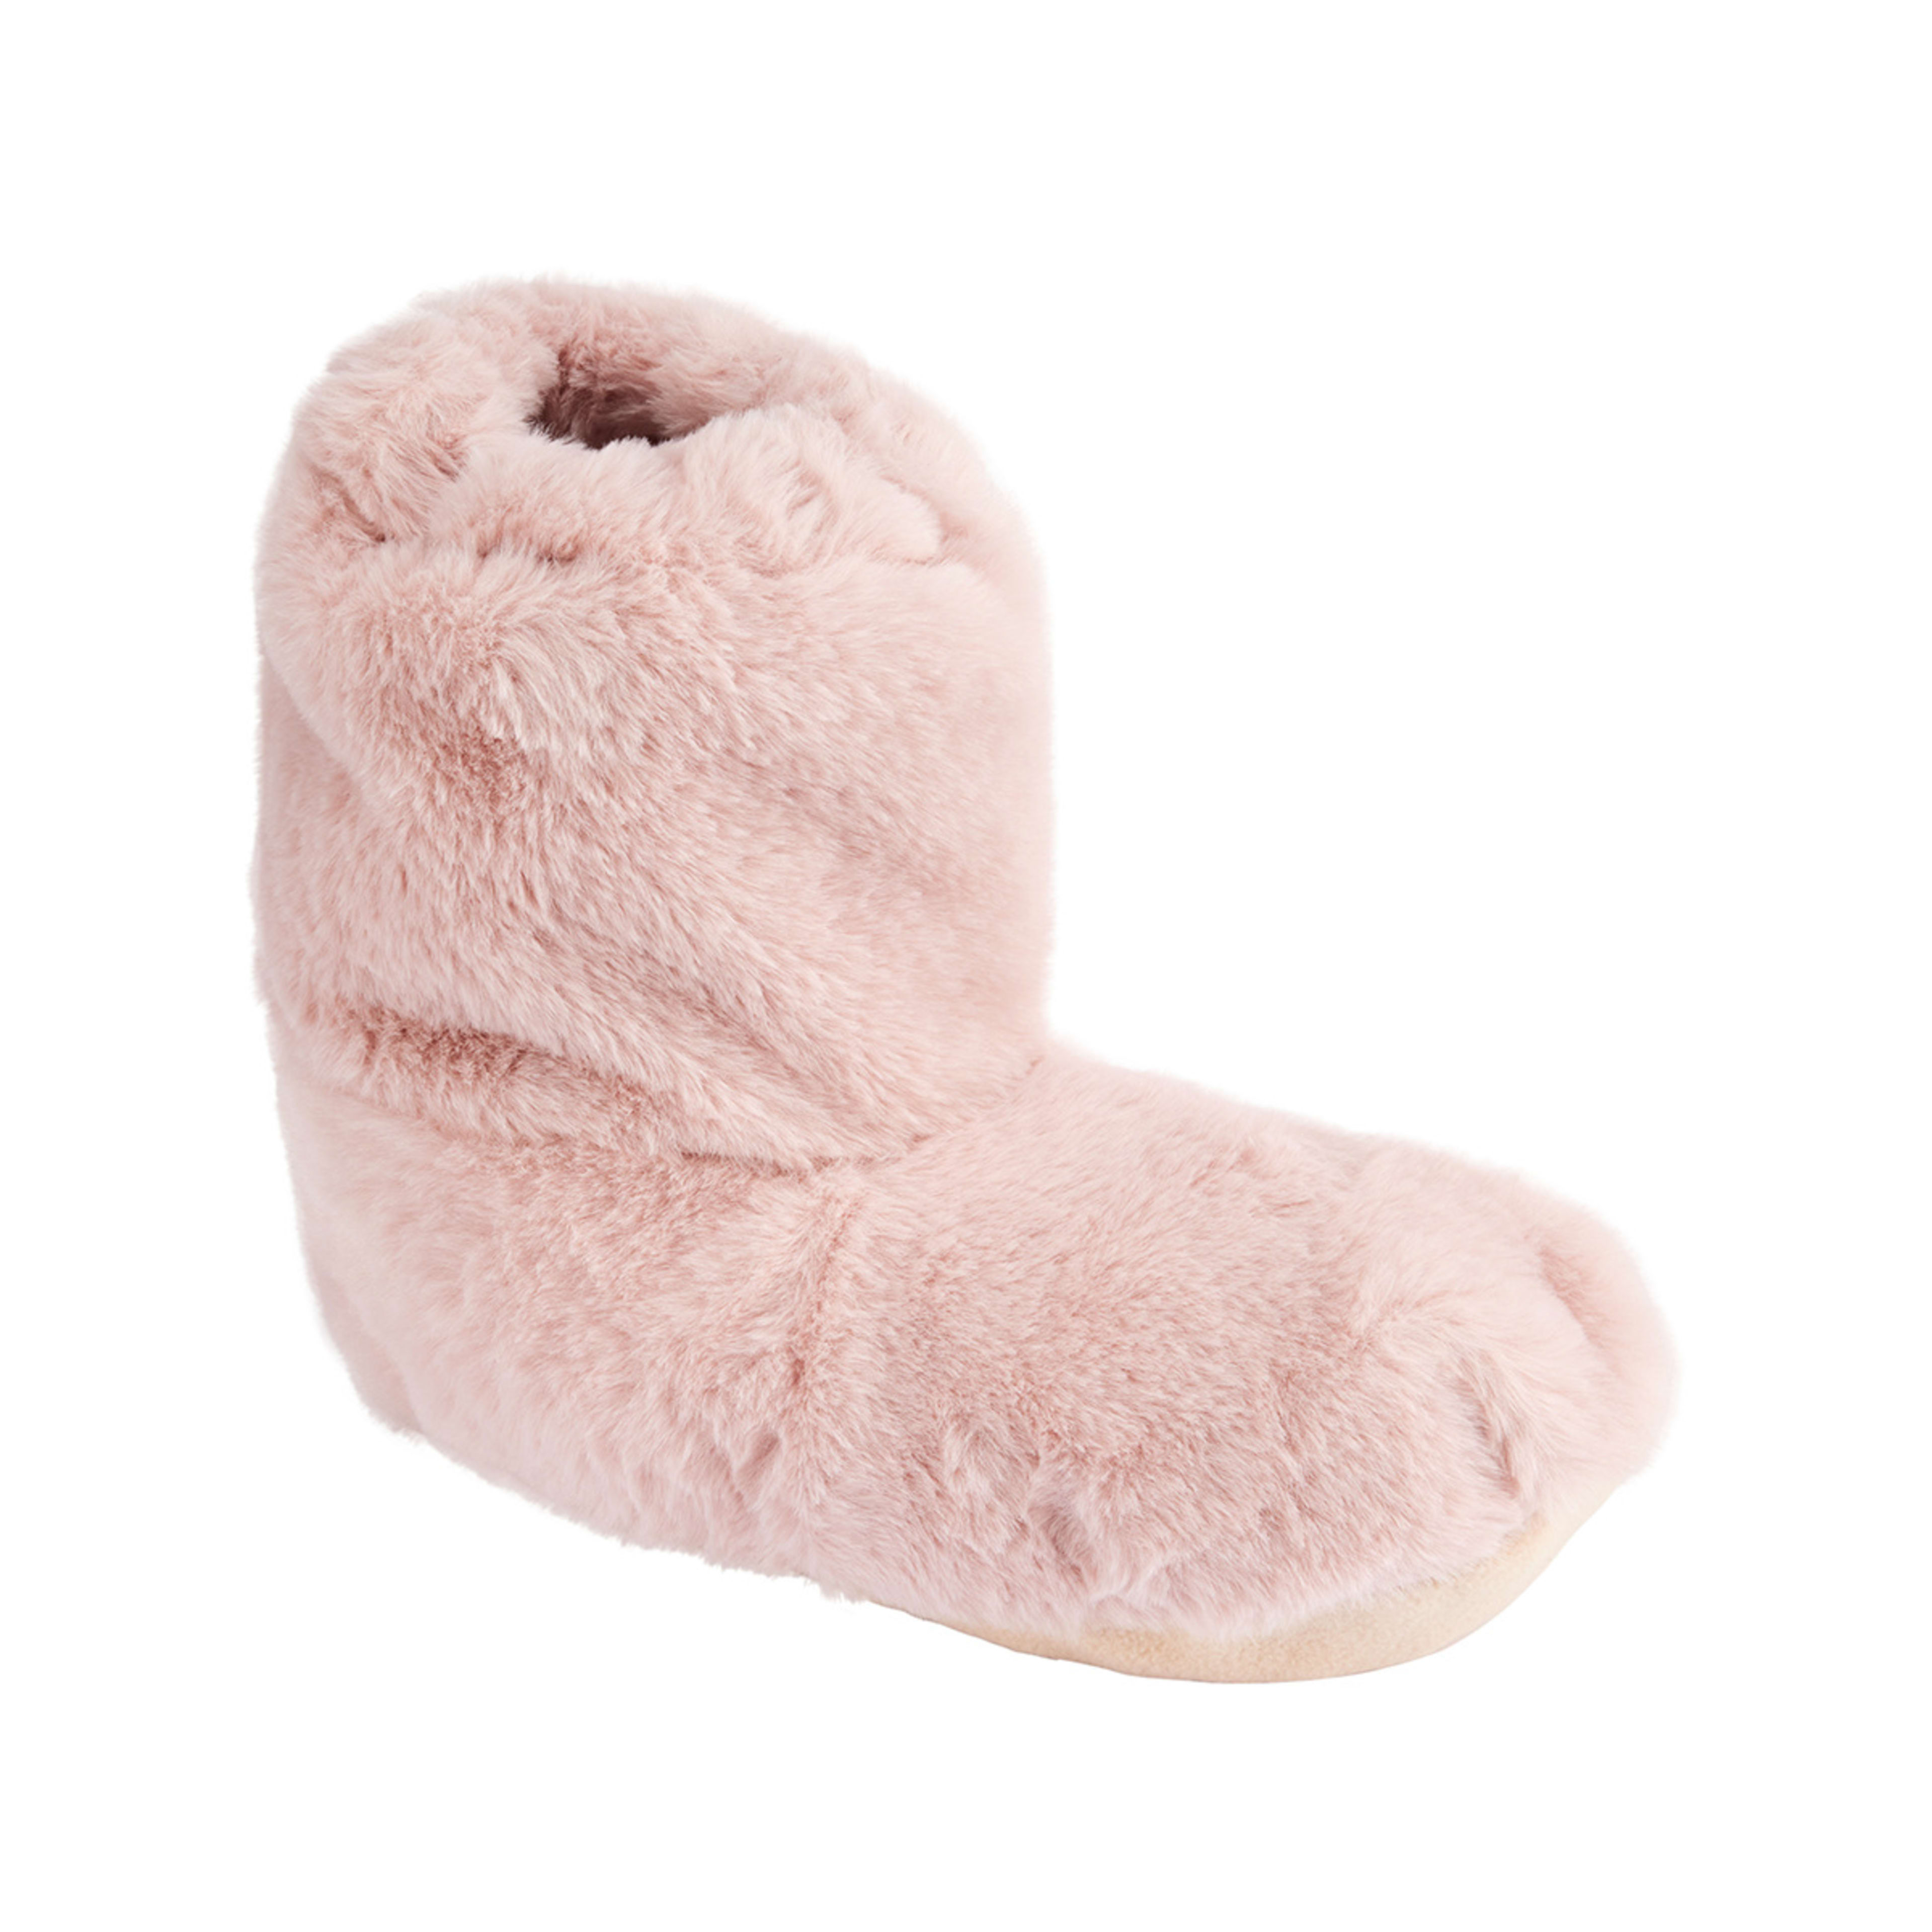 OXX Essentials Microwavable Slippers - Pink - Kmart